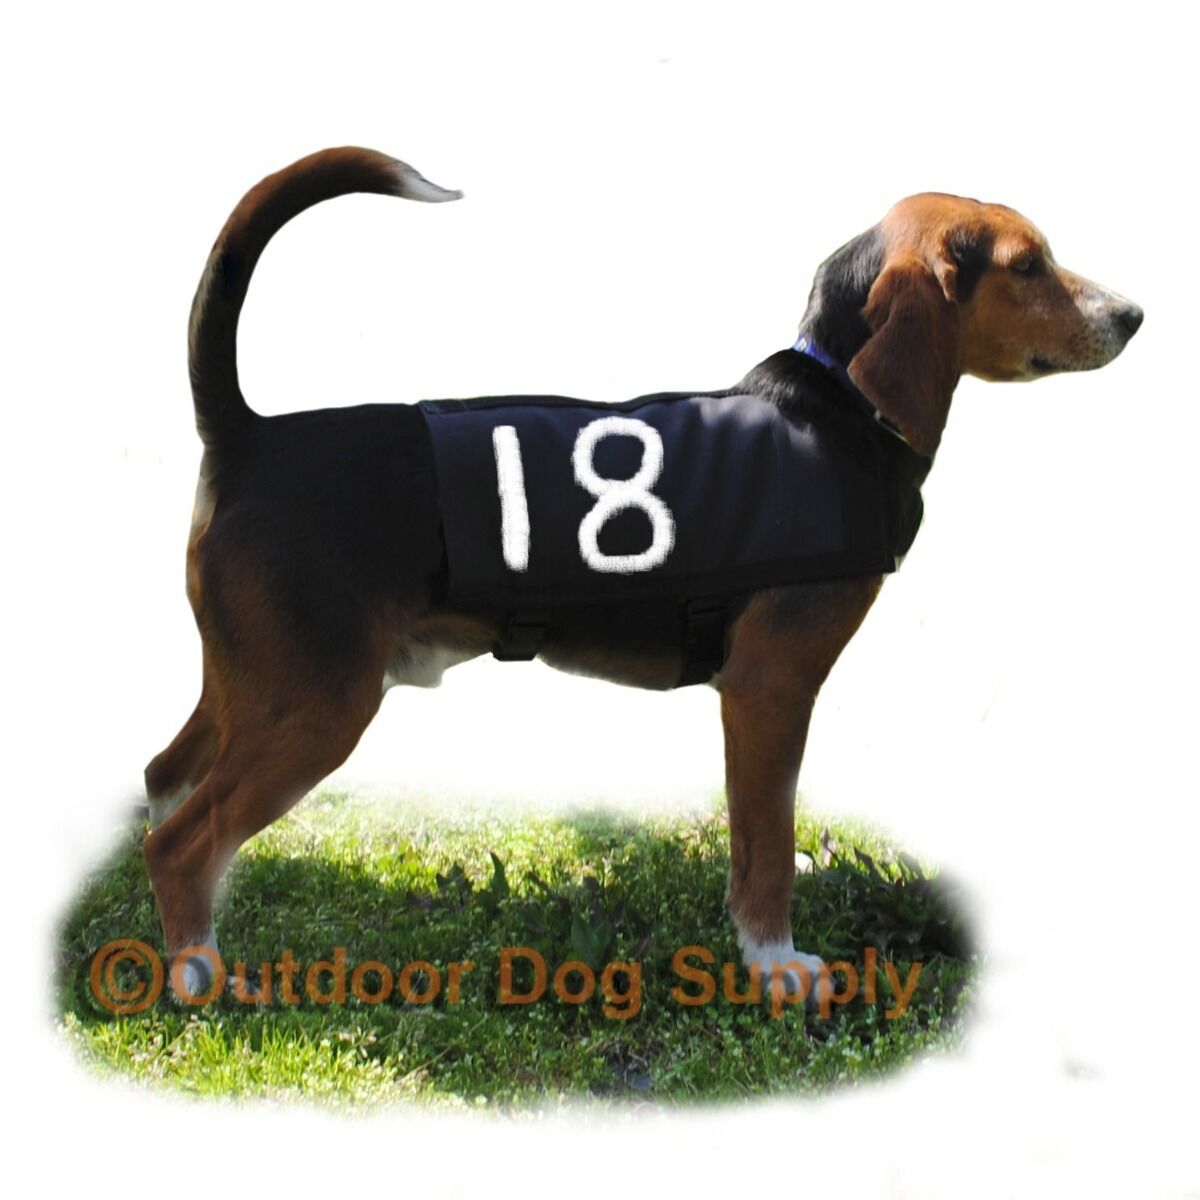 Halemar Dog Field Trial Race Blankets Jackets Paint Your Own Numbers